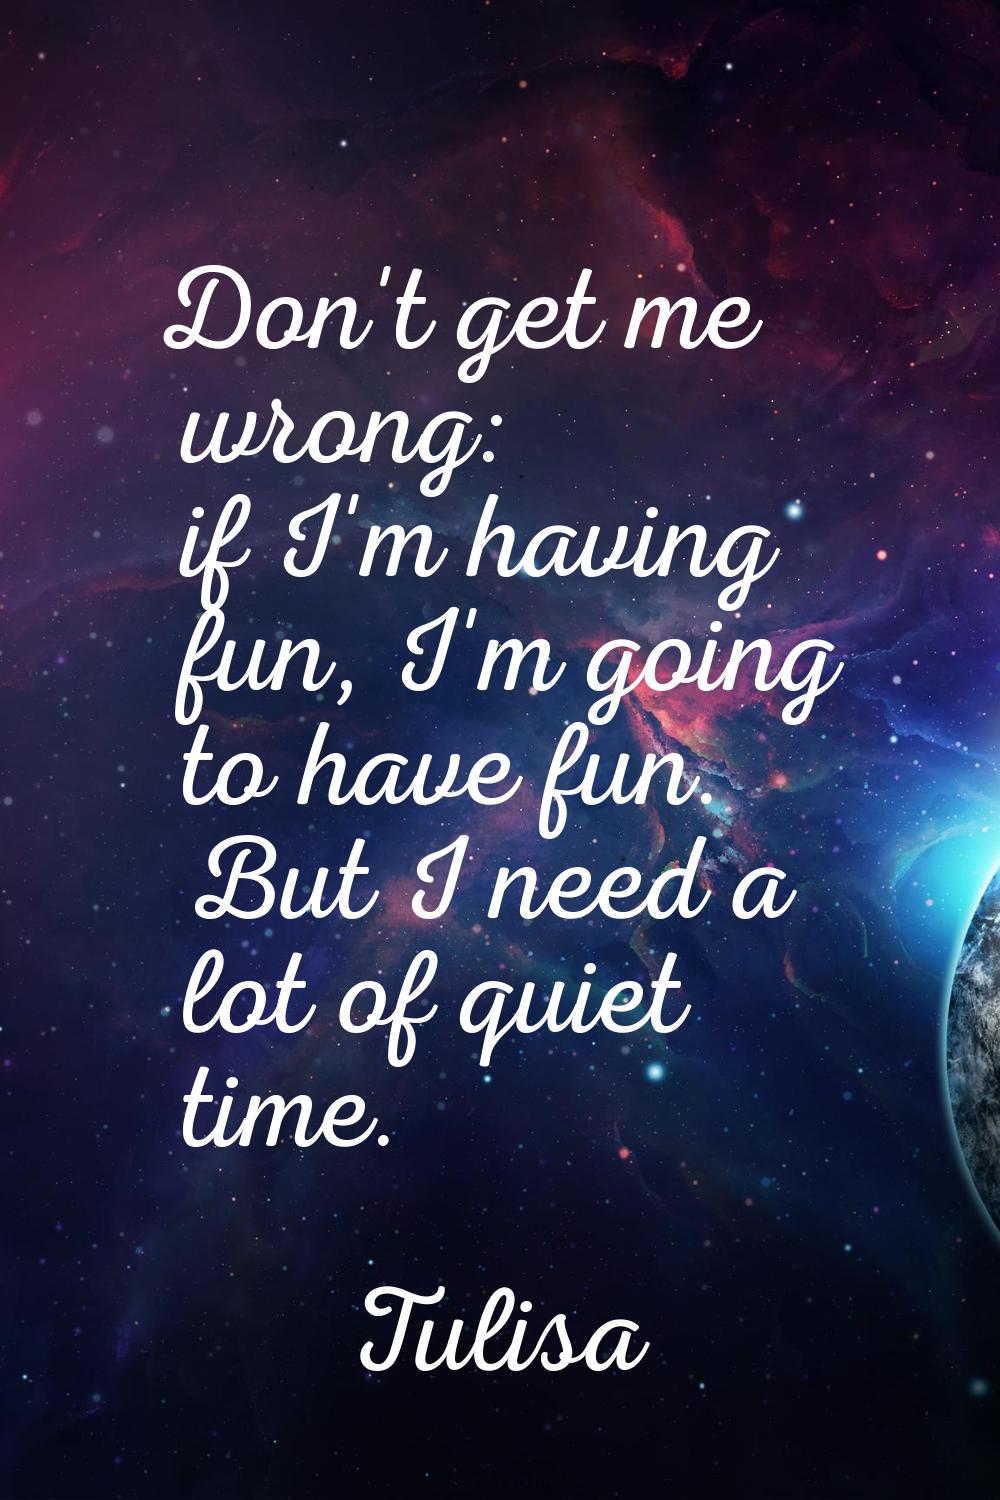 Don't get me wrong: if I'm having fun, I'm going to have fun. But I need a lot of quiet time.